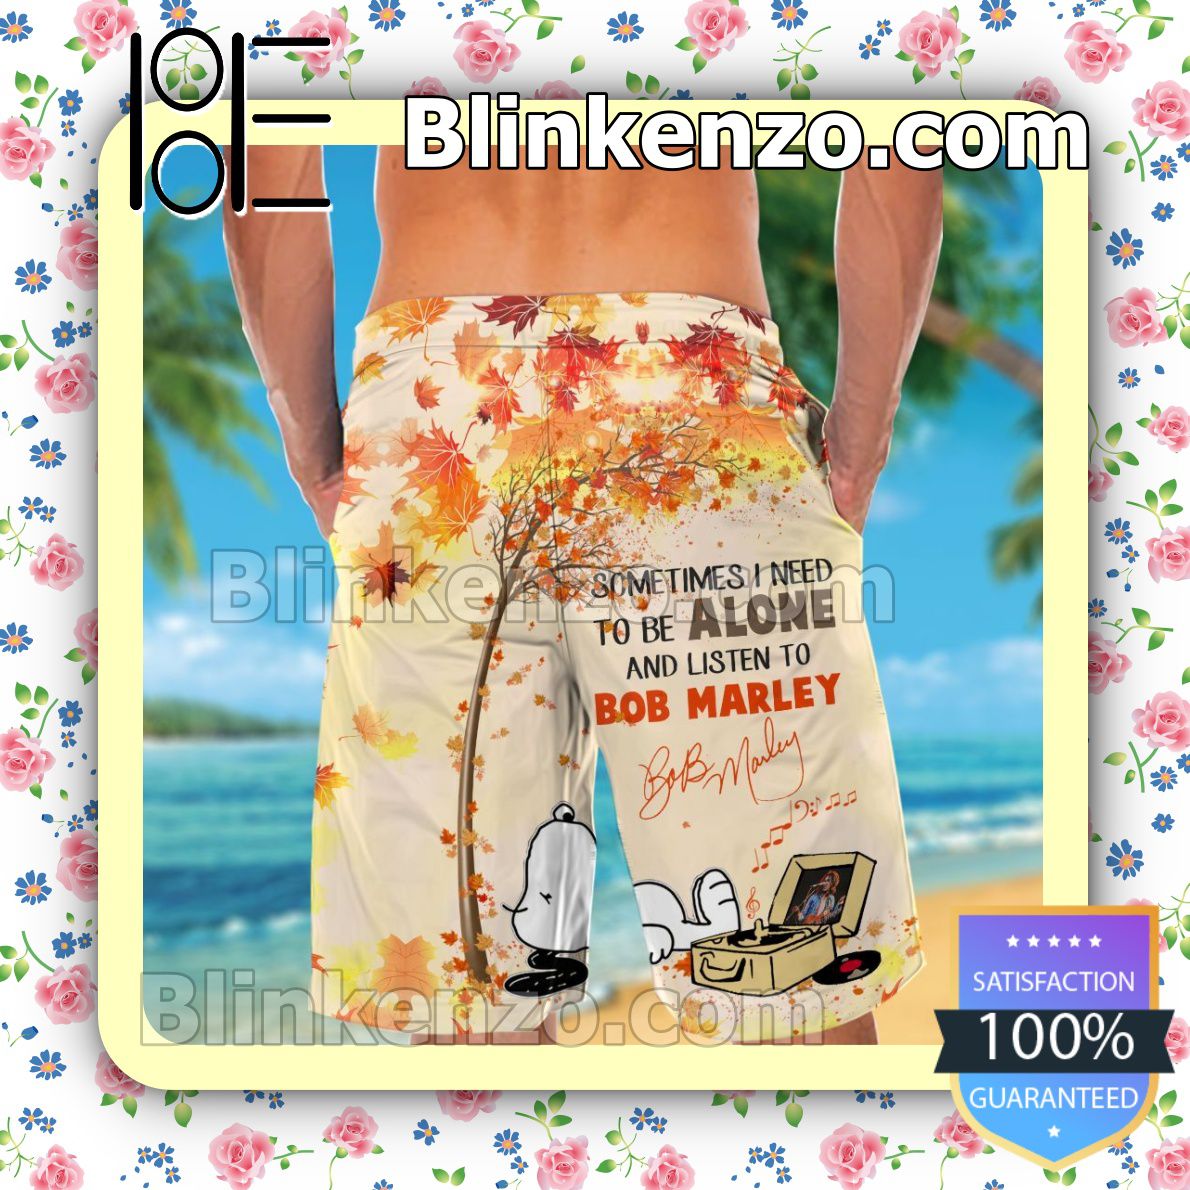 Excellent To Be Alone And Listen To Bob Marley Mens Shirt, Swim Trunk